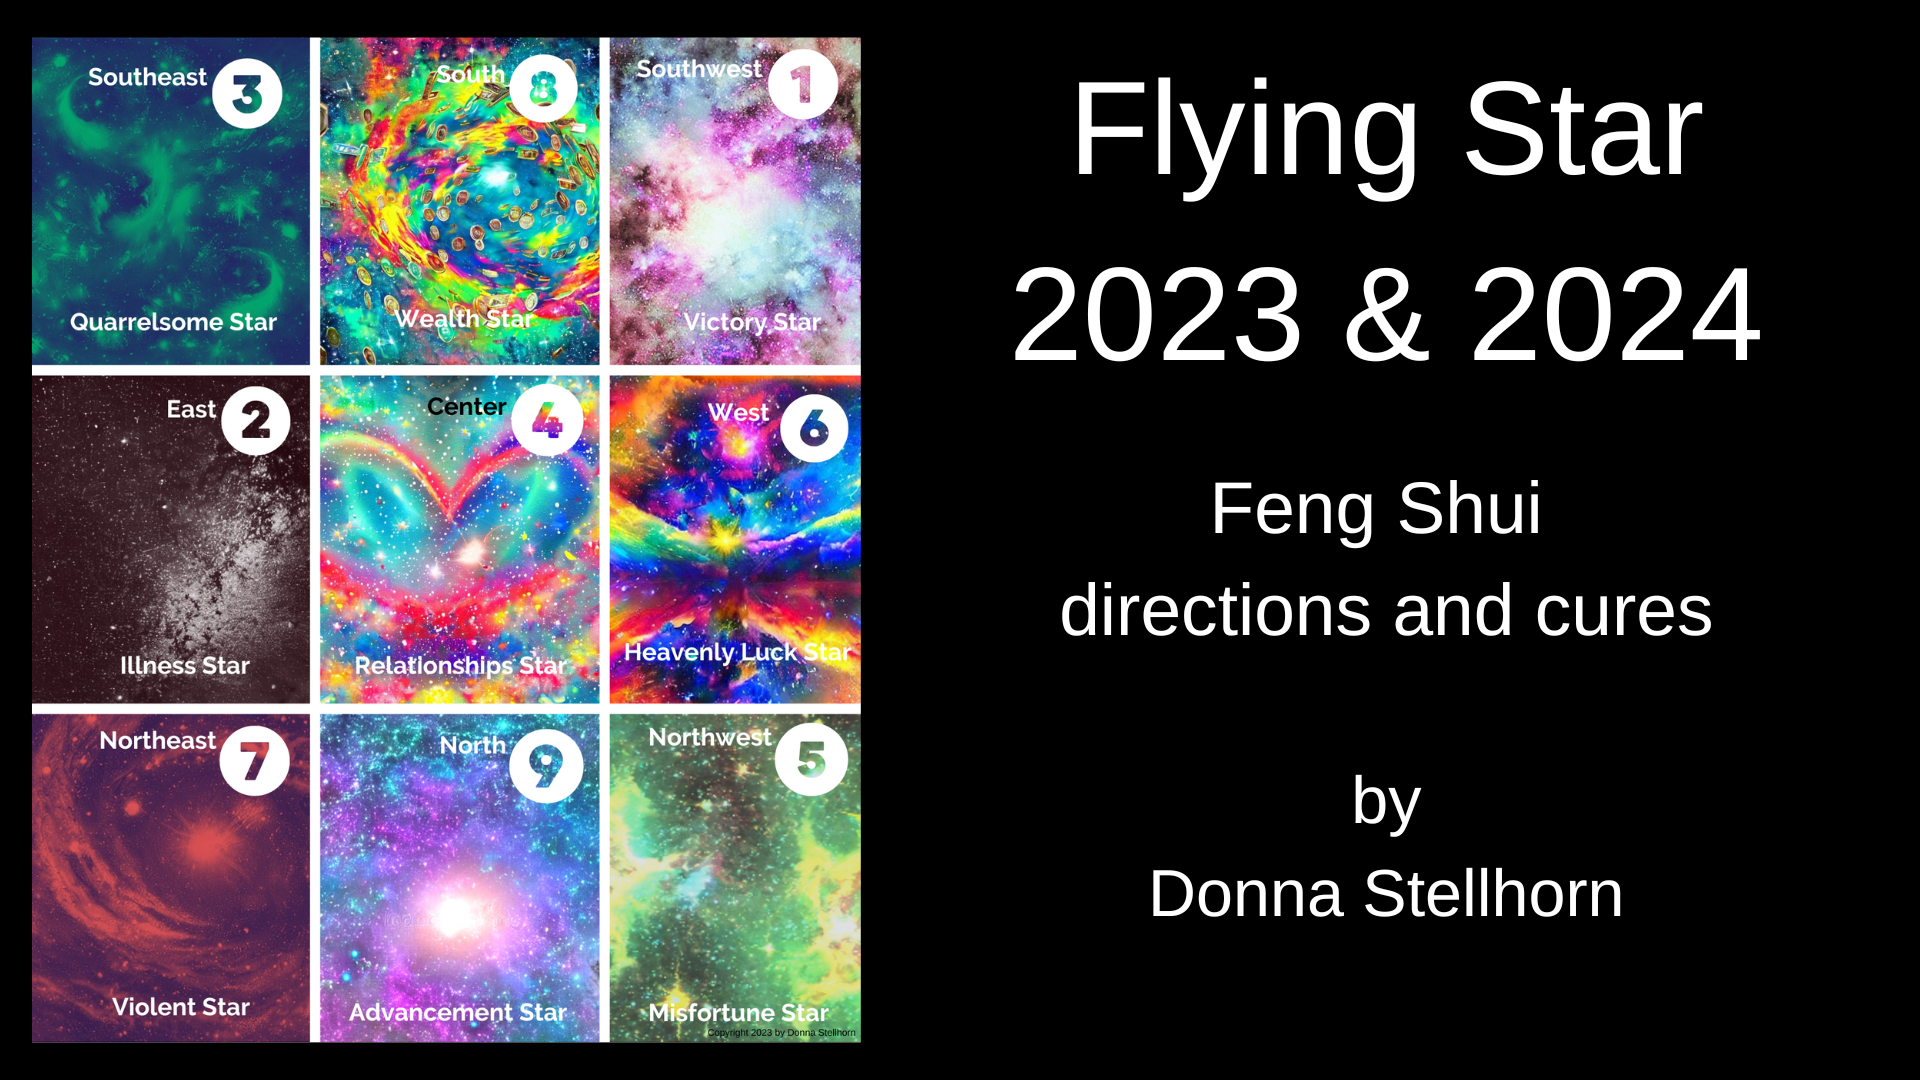 Flying Star 2023 and 2024 Astrology, Tarot and Feng Shui with Donna